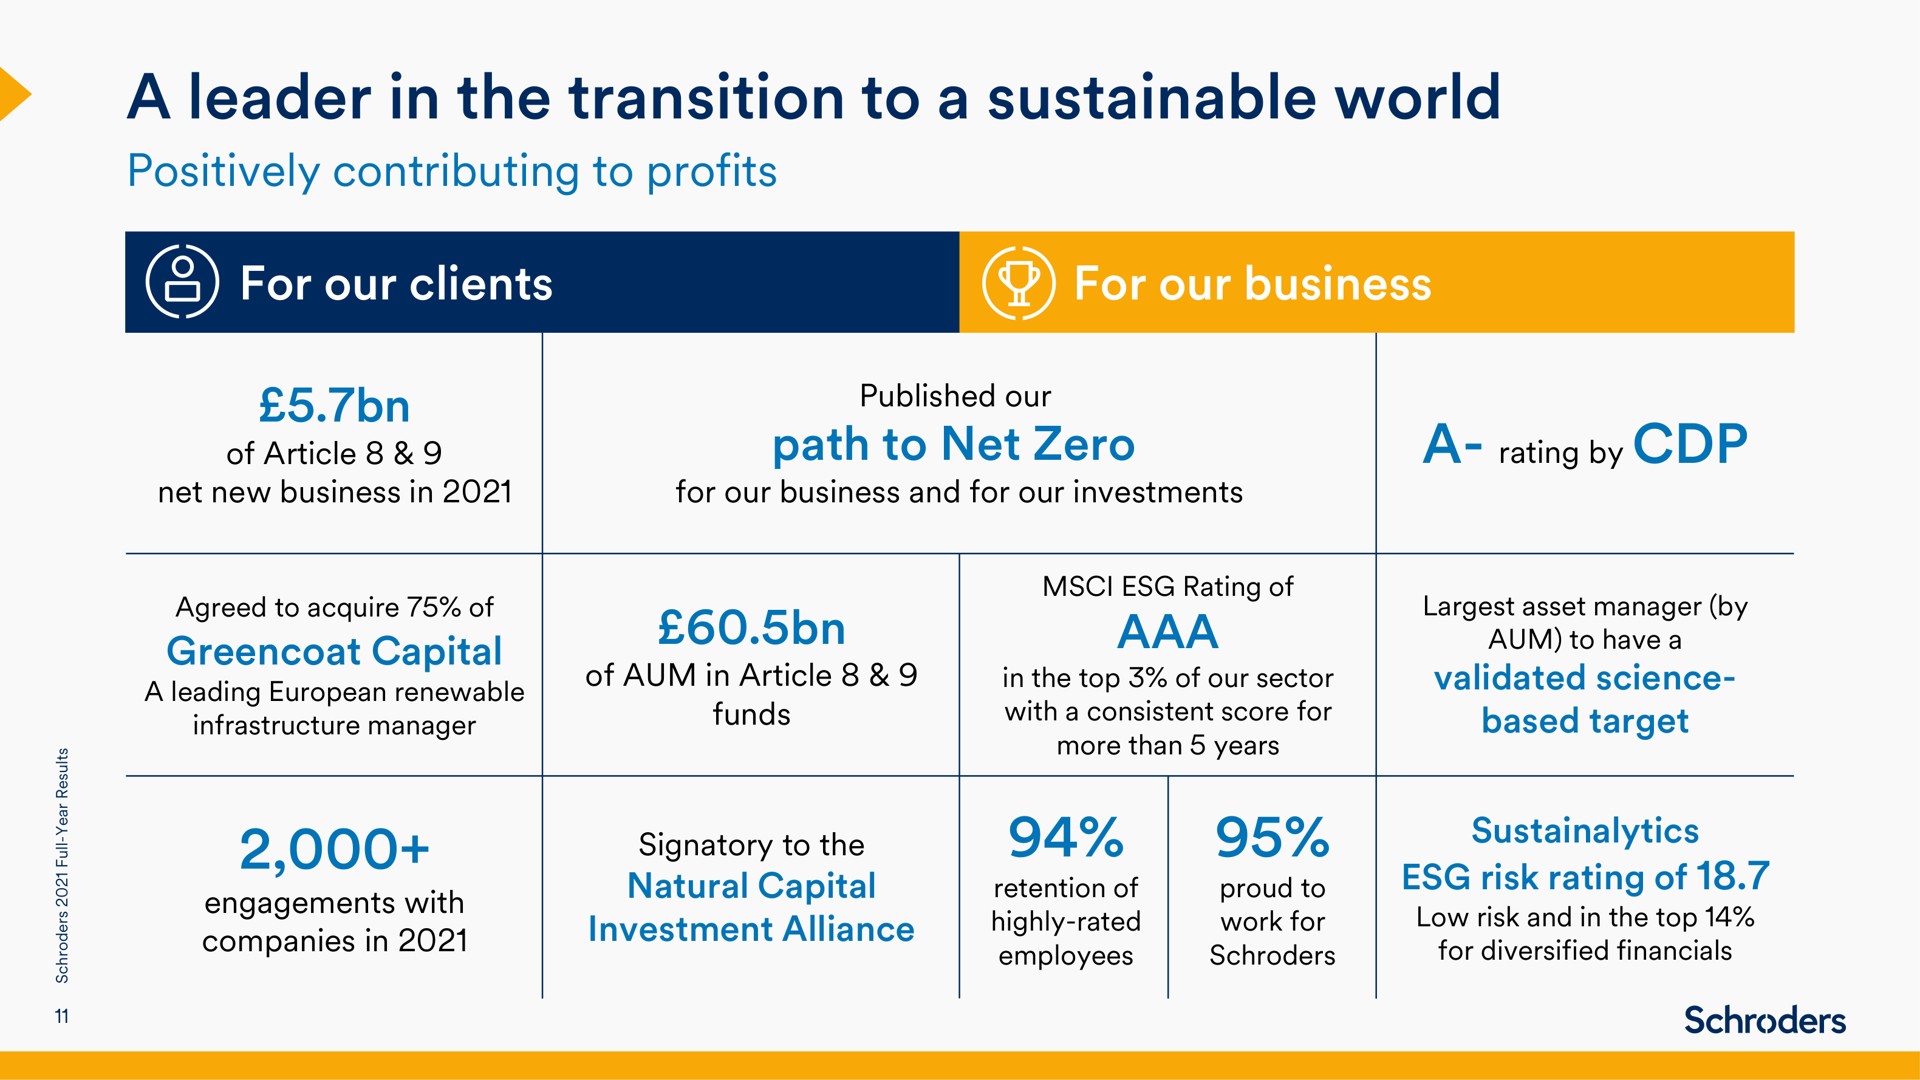 a leader in the transition to a sustainable world | Schroders